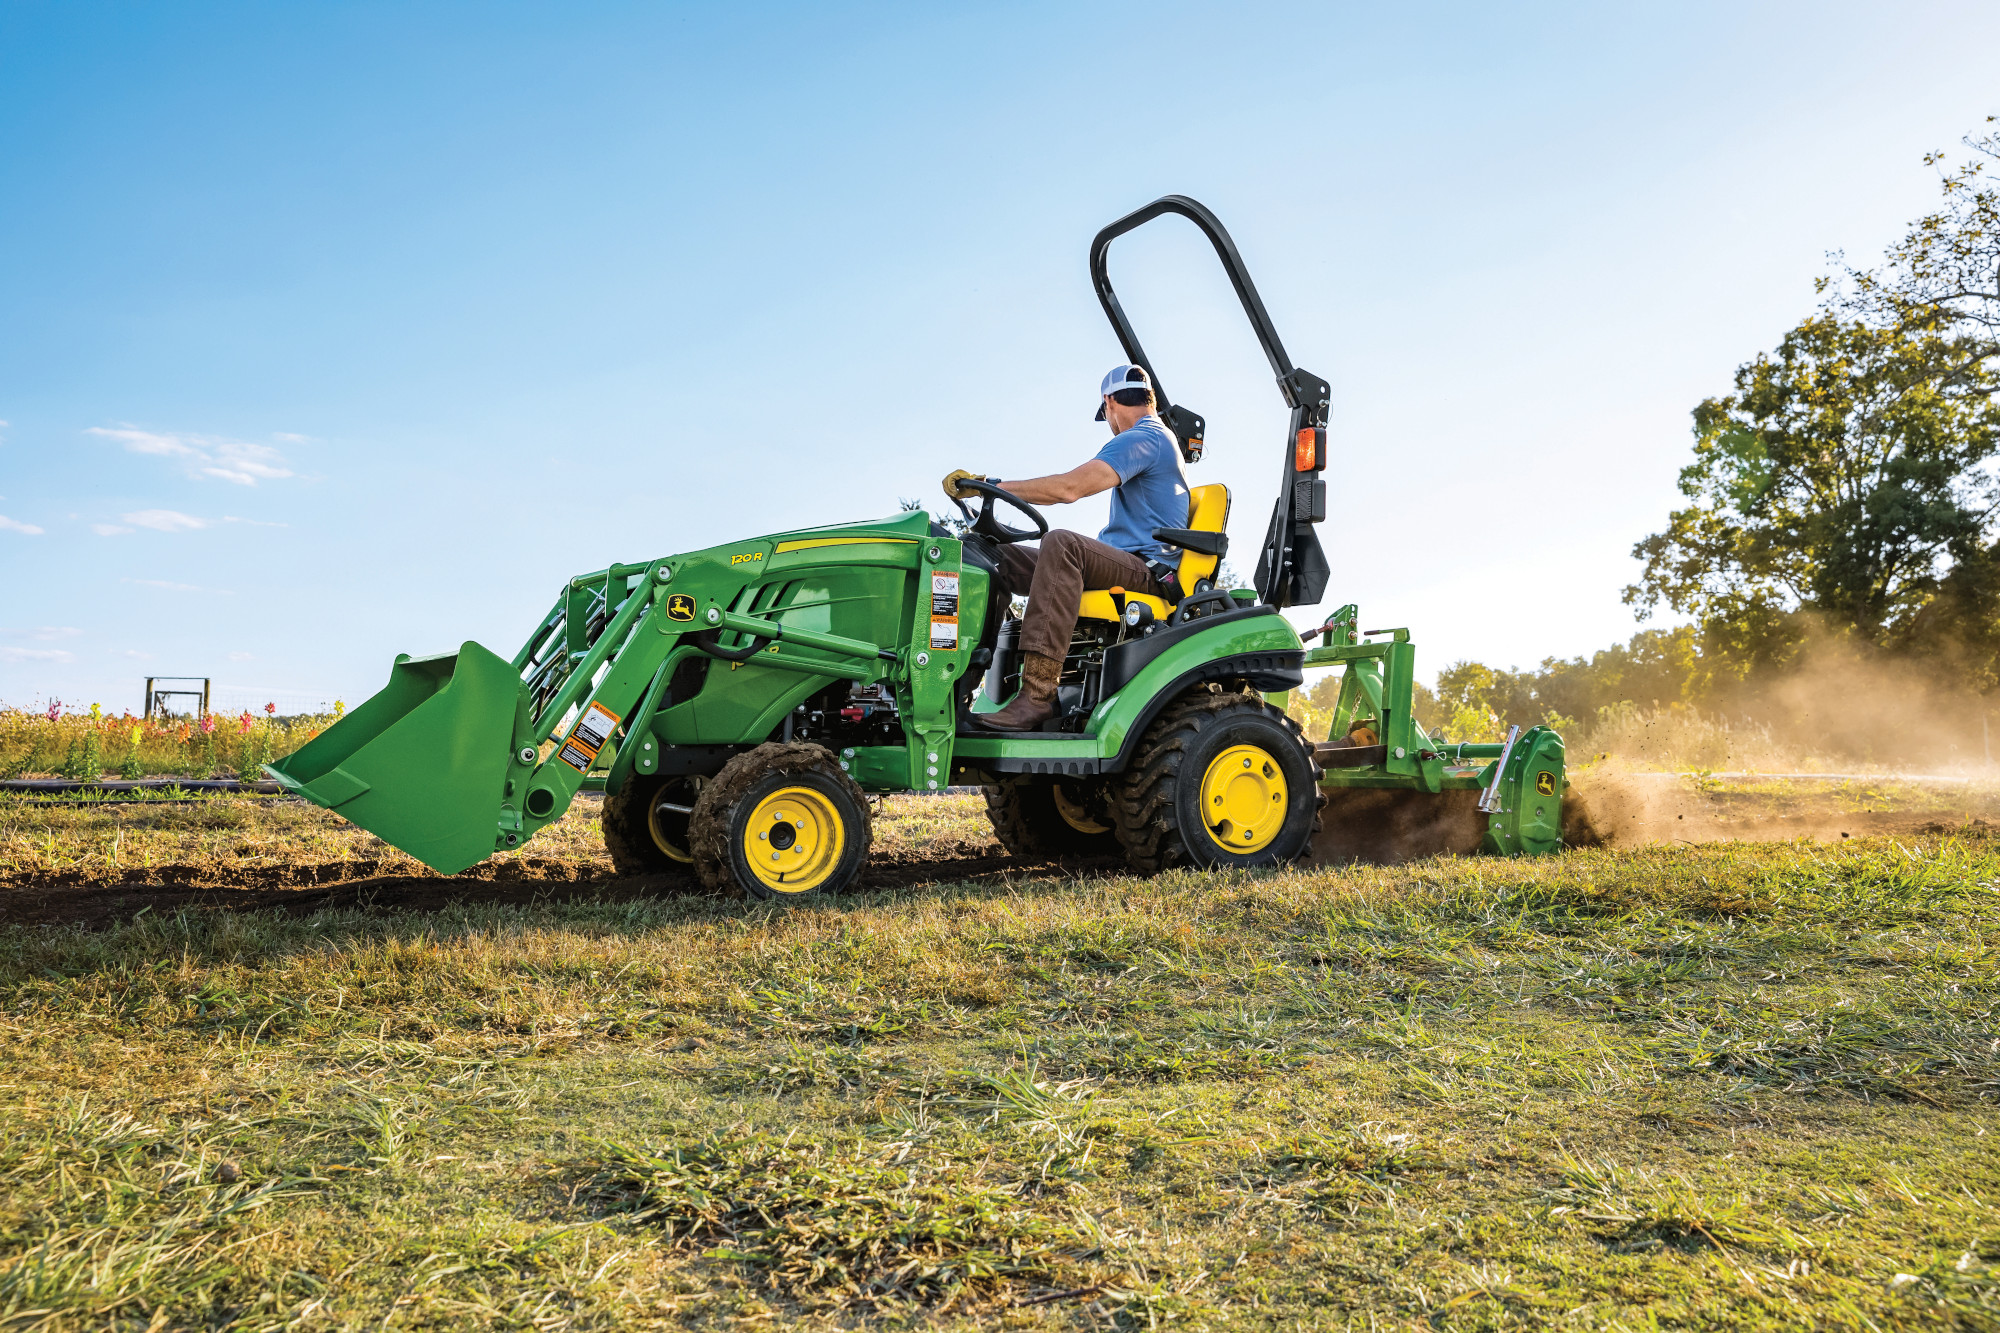 Which John Deere Compact Utility Tractor Is Right For You